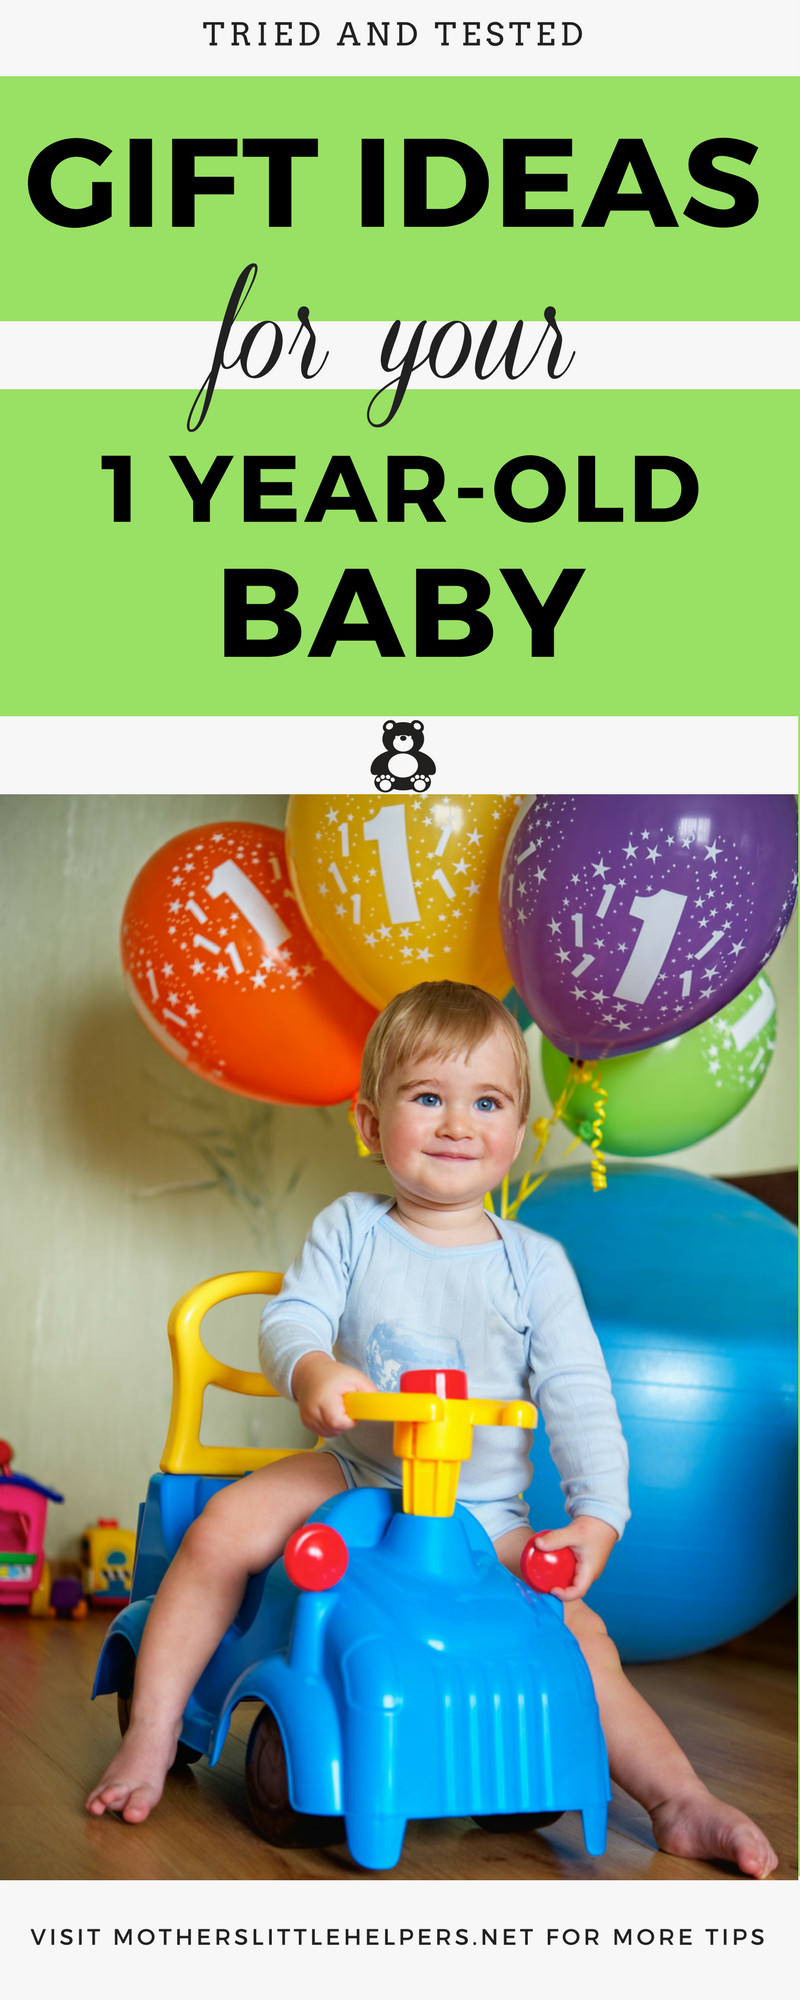 1 Year Old Baby Gifts
 Best Gift for e Year Old Baby Gift Guide 2019